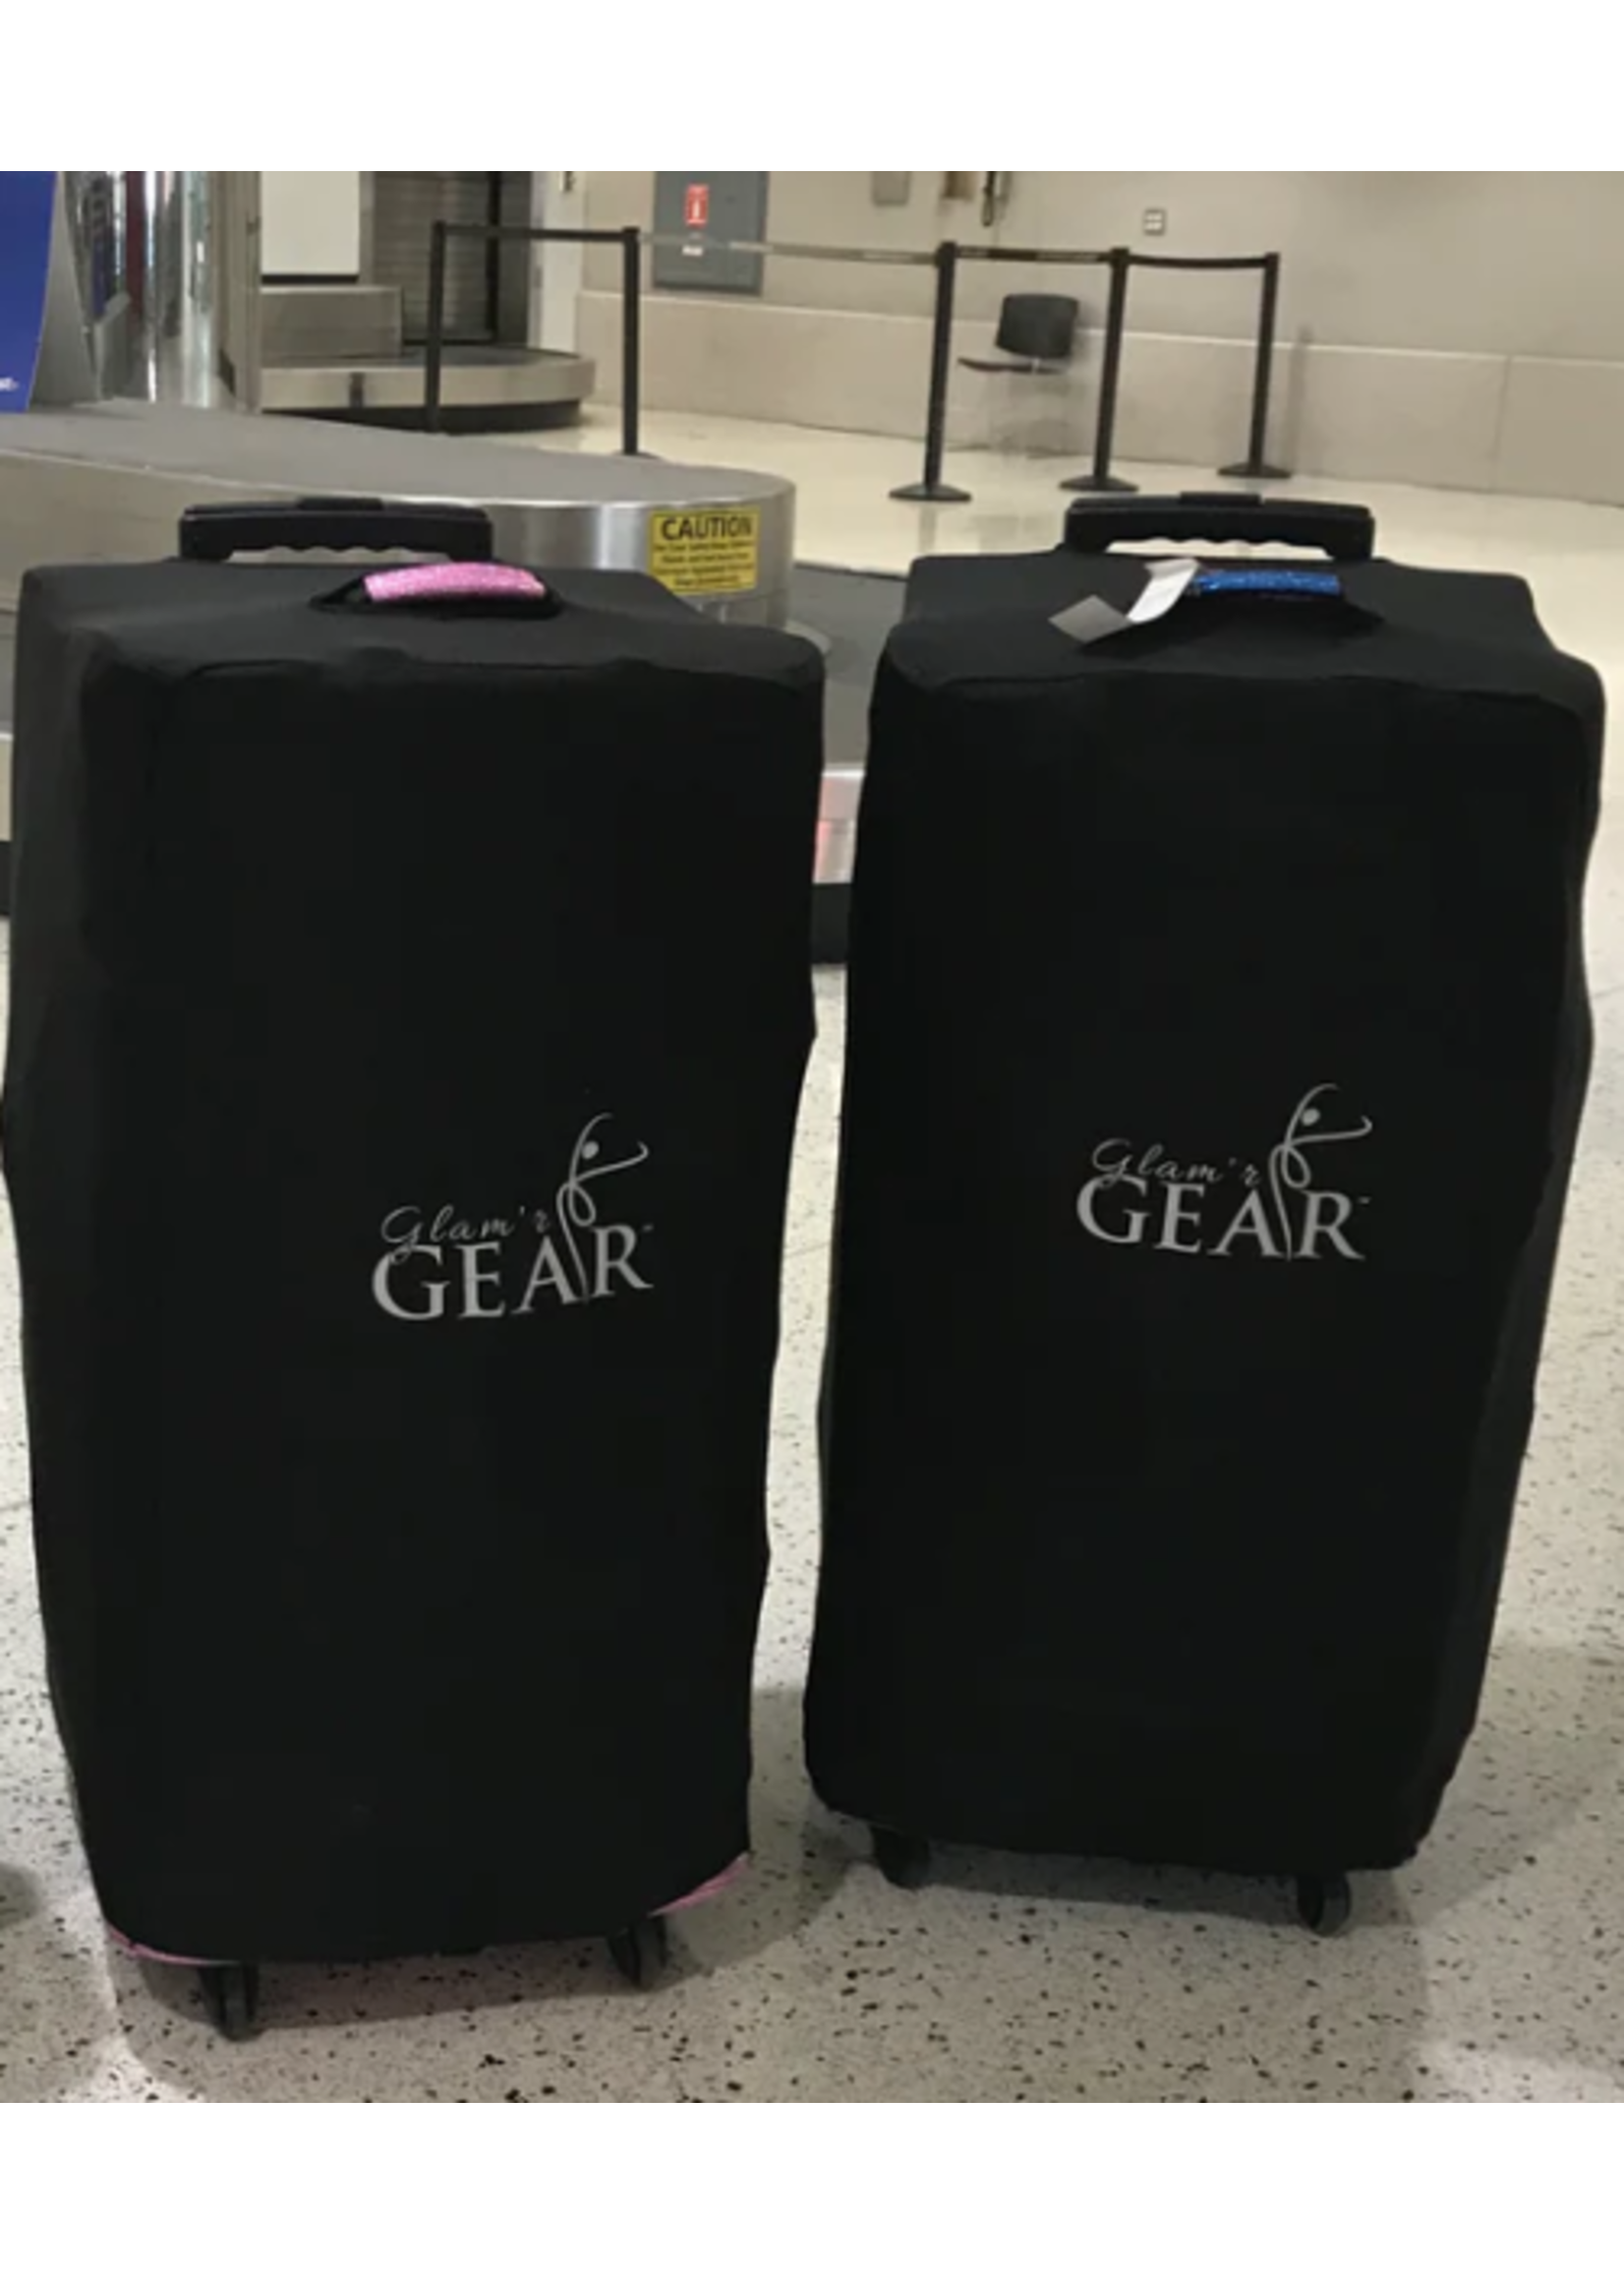 GLAM'R GEAR GLAM'R BAG PROTECTOR COVER